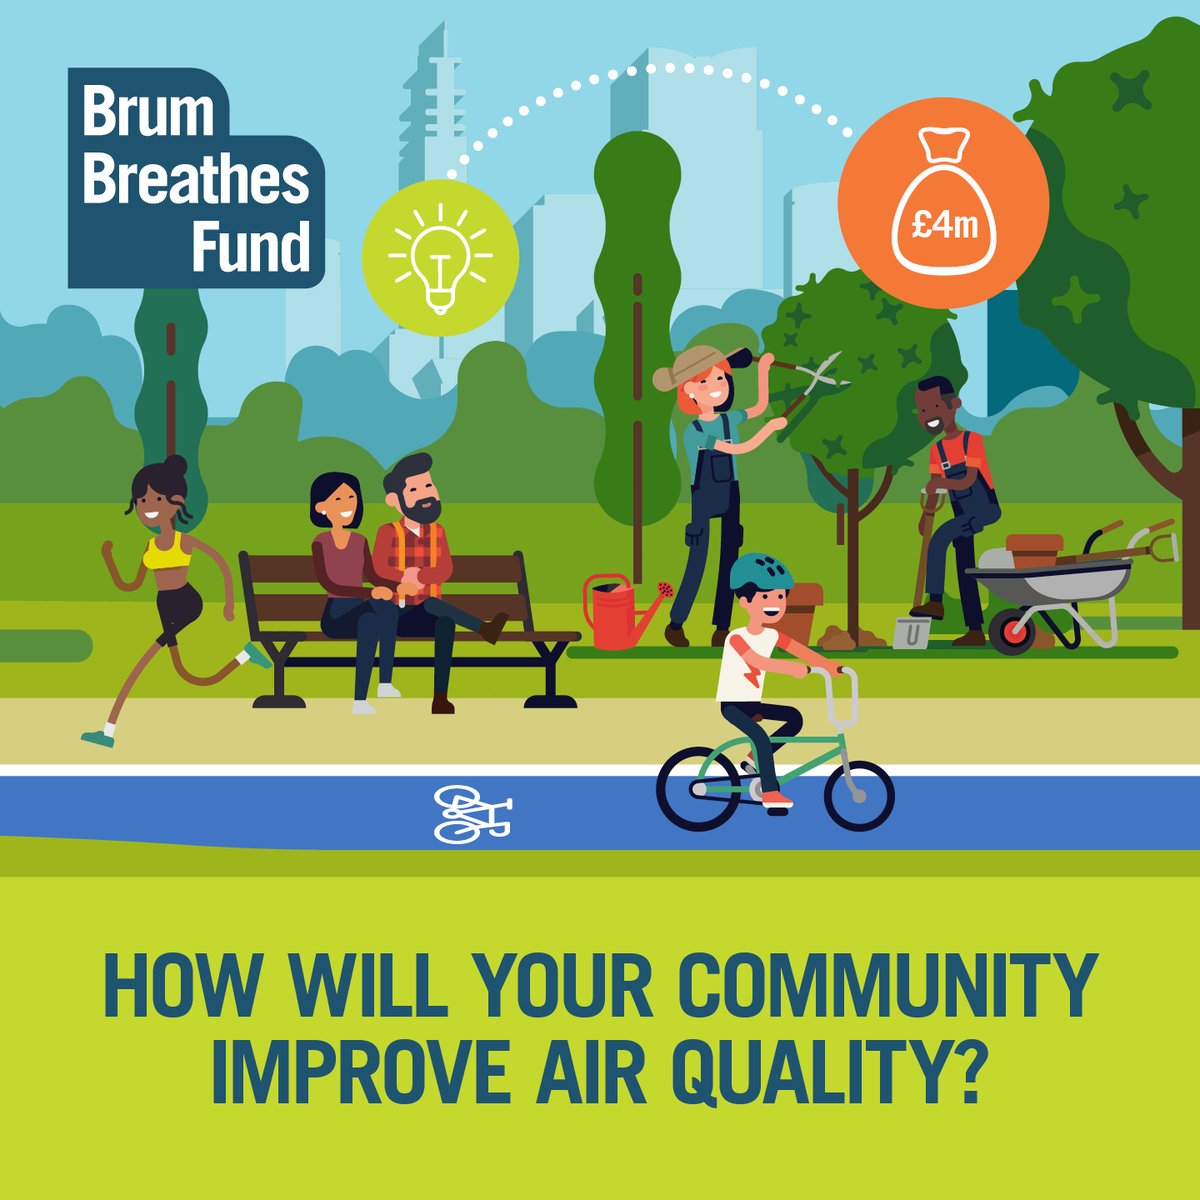 Do you have a great idea to help people change the way they travel and improve air quality? Apply to the #BrumBreathesFund to make it happen!

Find out more at orlo.uk/6Rrpk